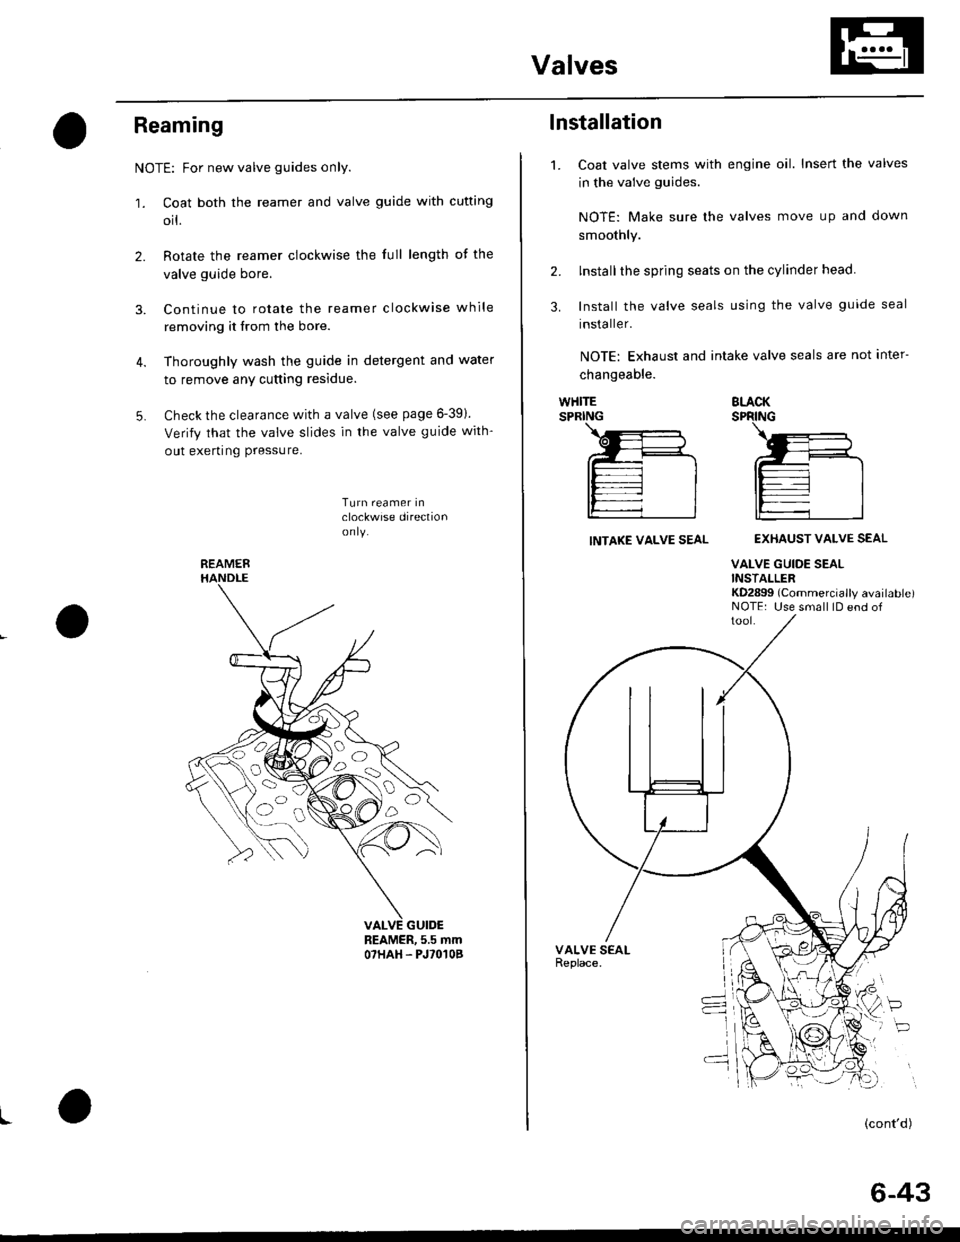 HONDA CIVIC 1998 6.G Owners Guide Valves
Reaming
NOTE: For new valve guides only.
1. Coat both the reamer and valve guide with cufting
orl.
2. Rotate the reamer clockwise the full length of the
valve guide bore.
3. Continue to rotate 